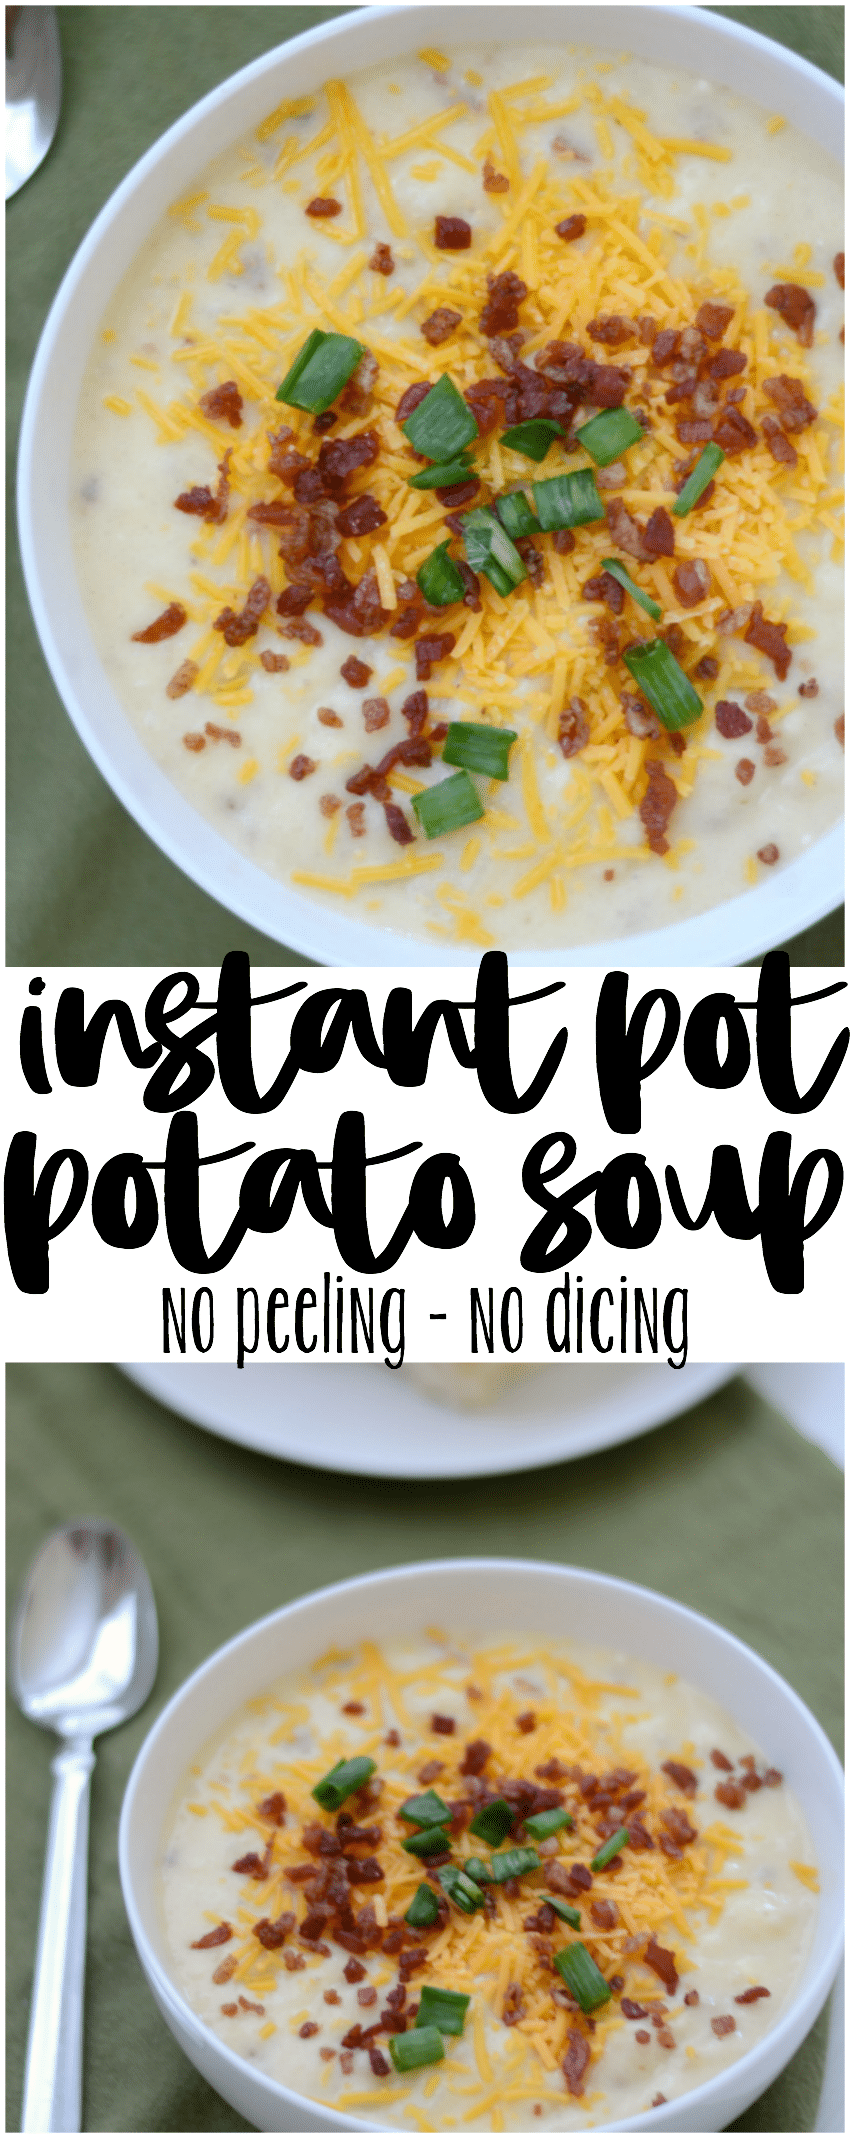 This delicious Instant Pot potato soup recipe uses frozen hash brown potatoes to make it super easy to make!